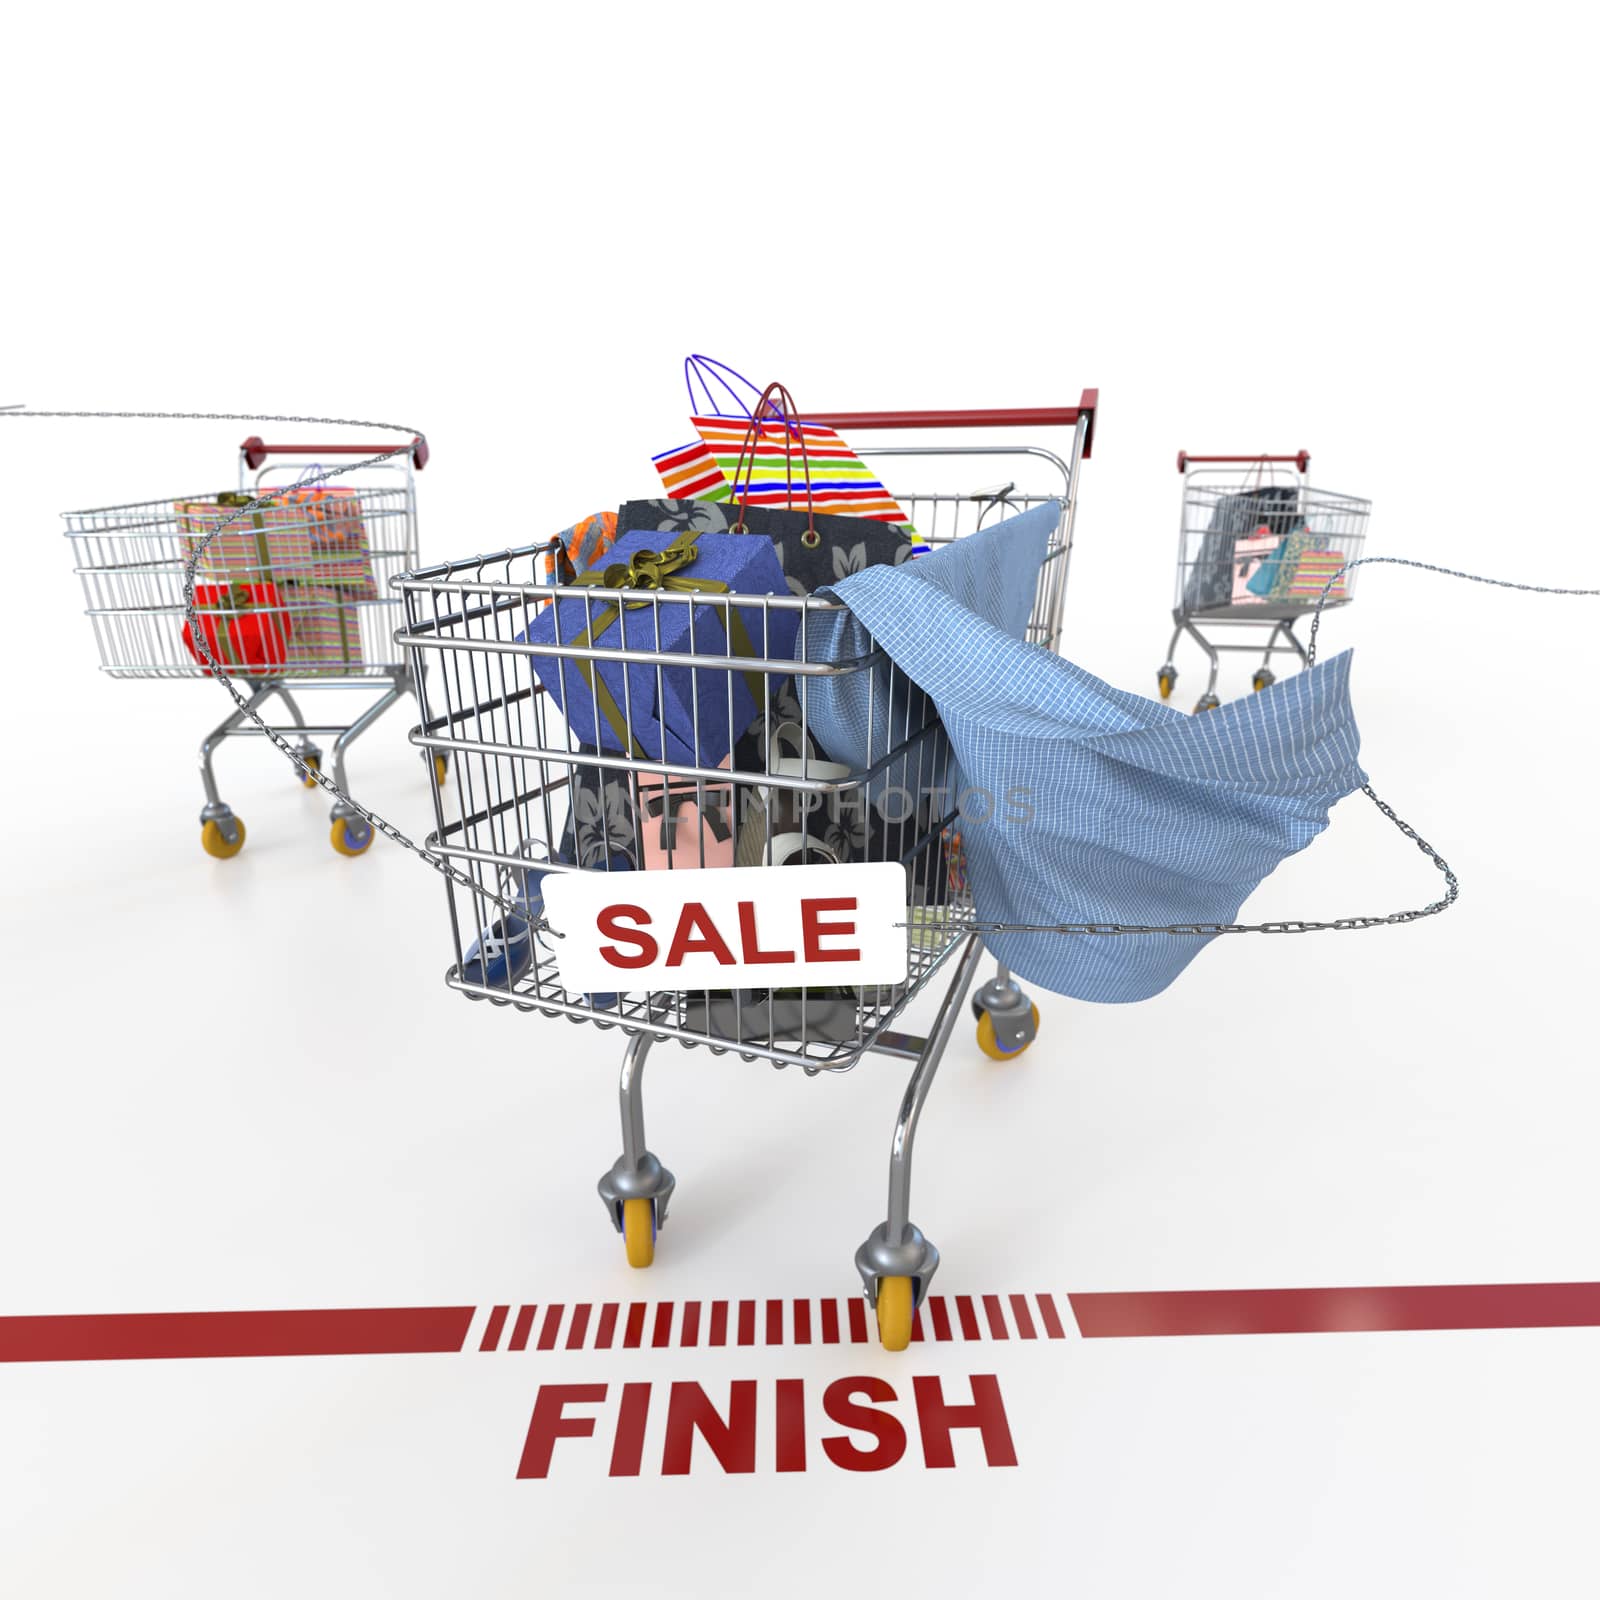 shopping sale concept background with shopping trolley on isolate white